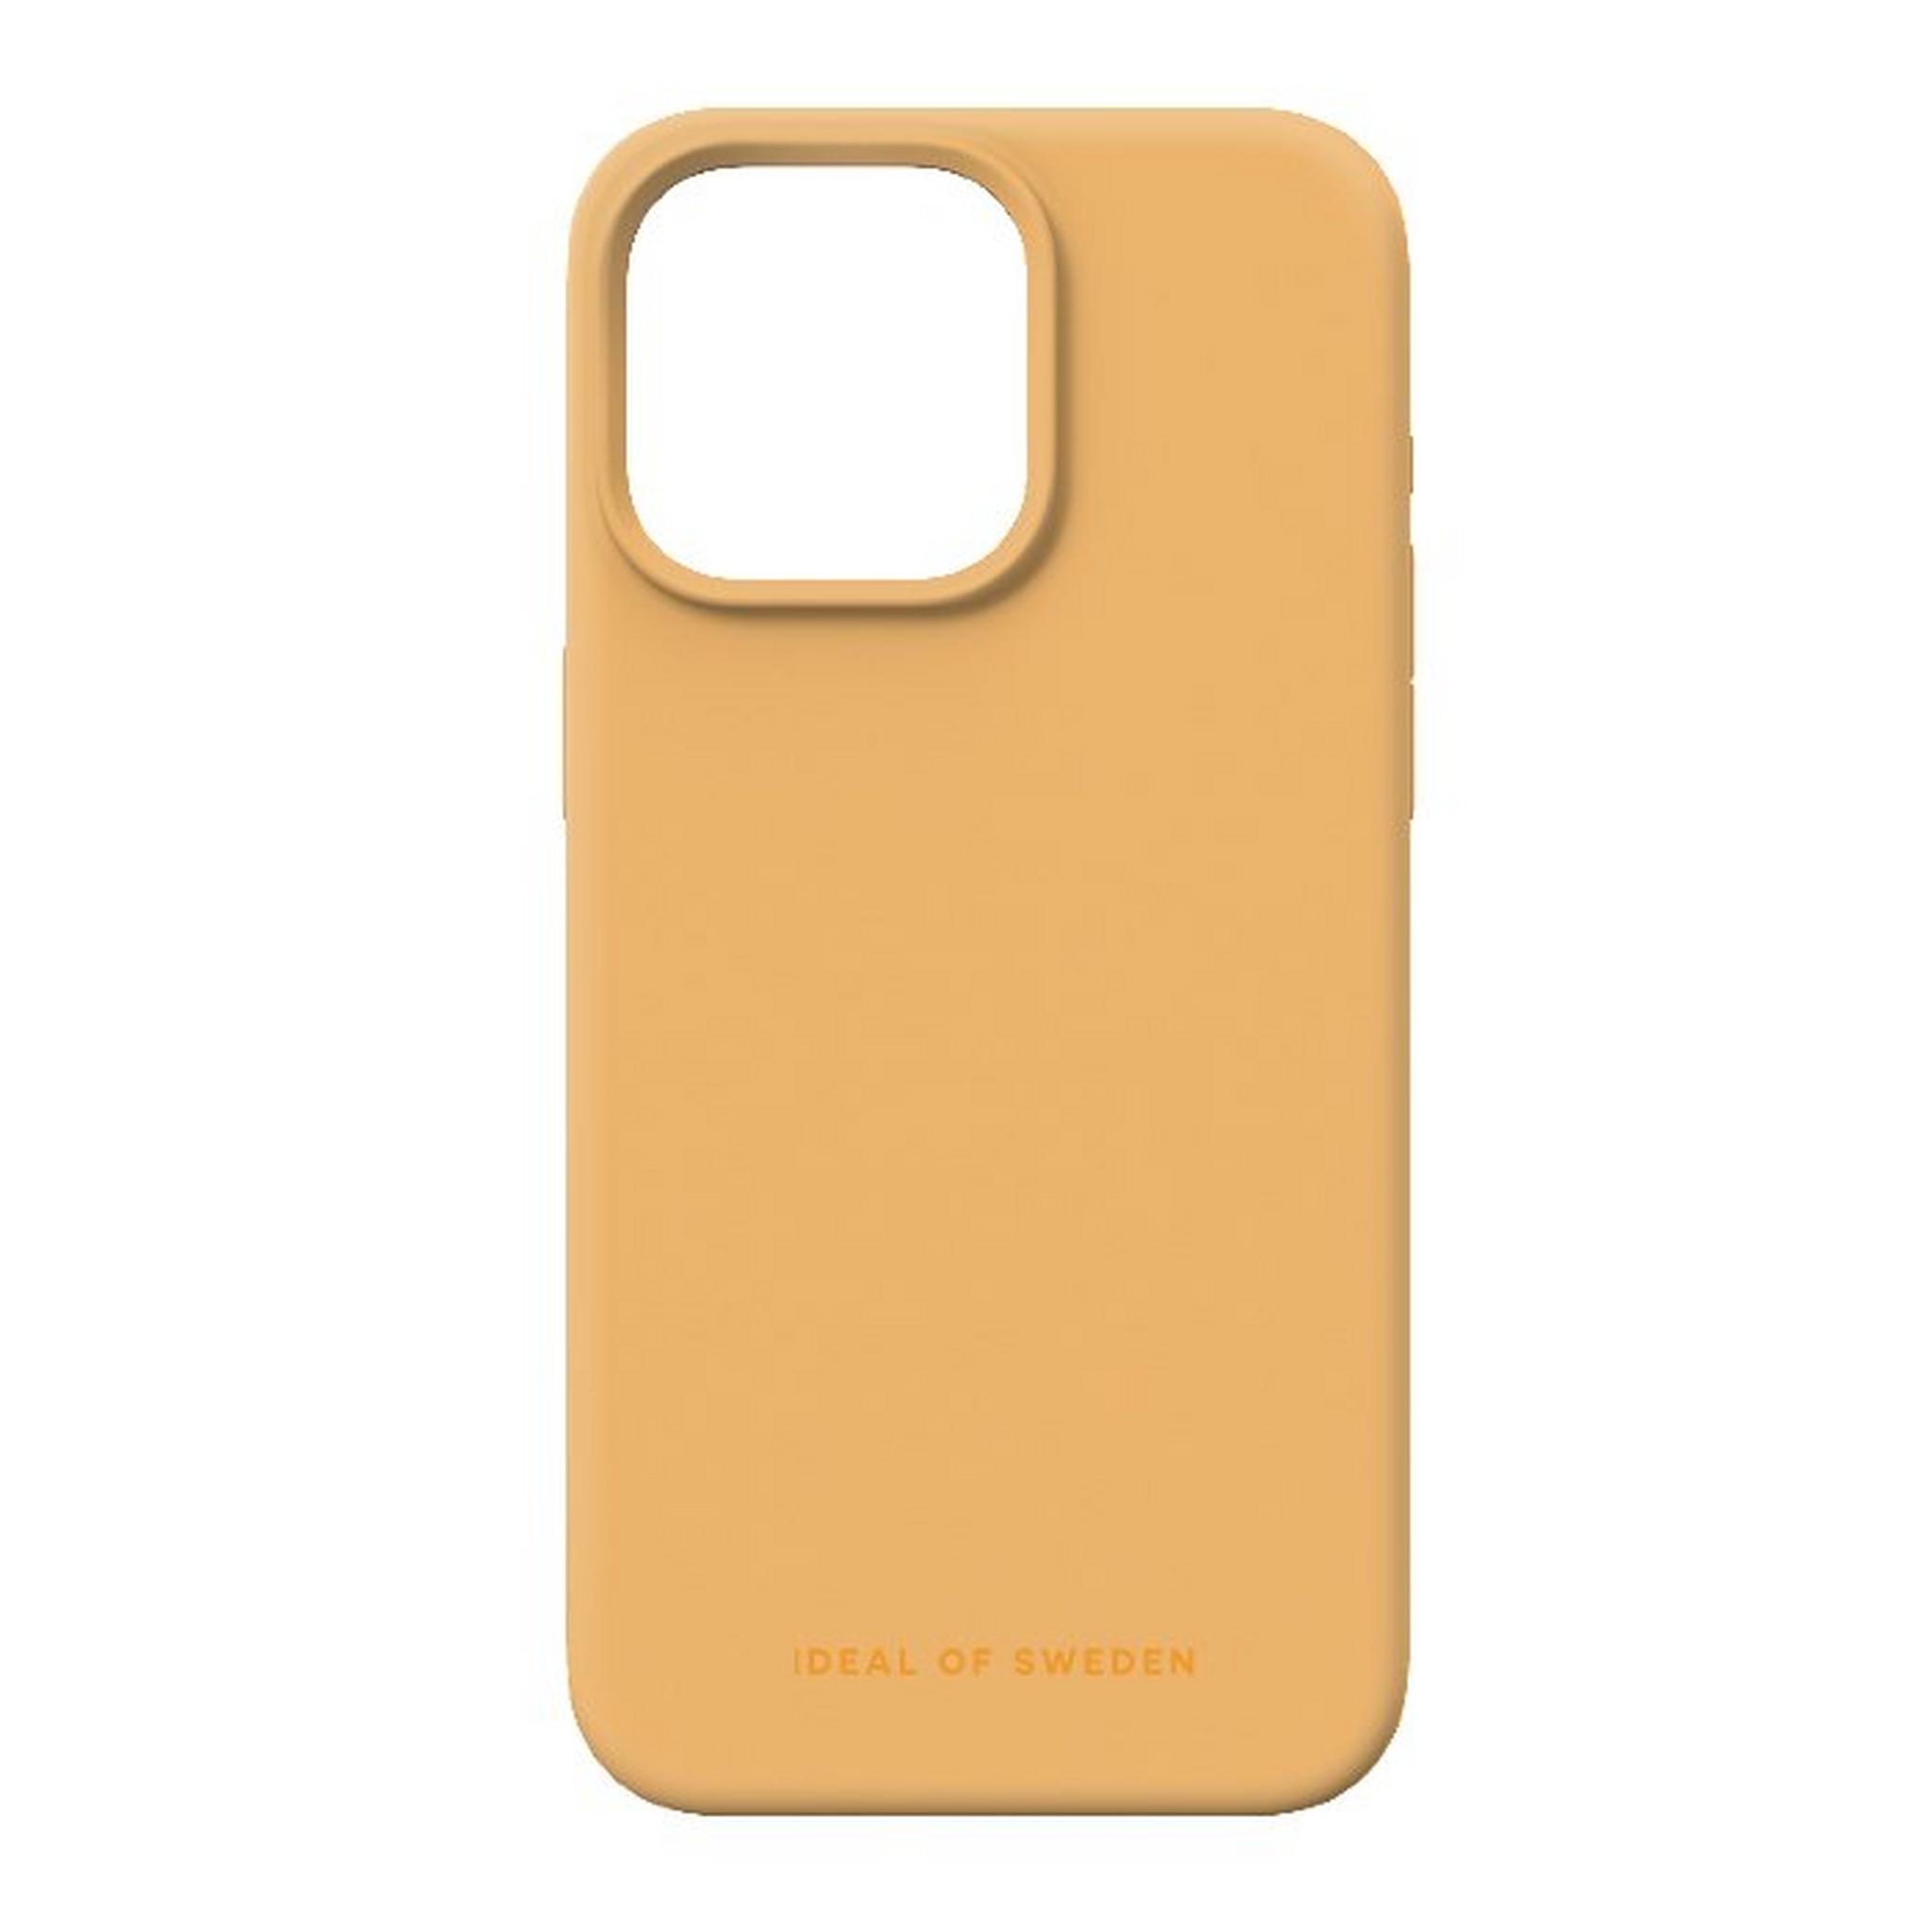 Ideal of Sweden MagSafe Silicone Case for iPhone 15 Pro Max (IDSICMS-I2367P-475) - Apricot